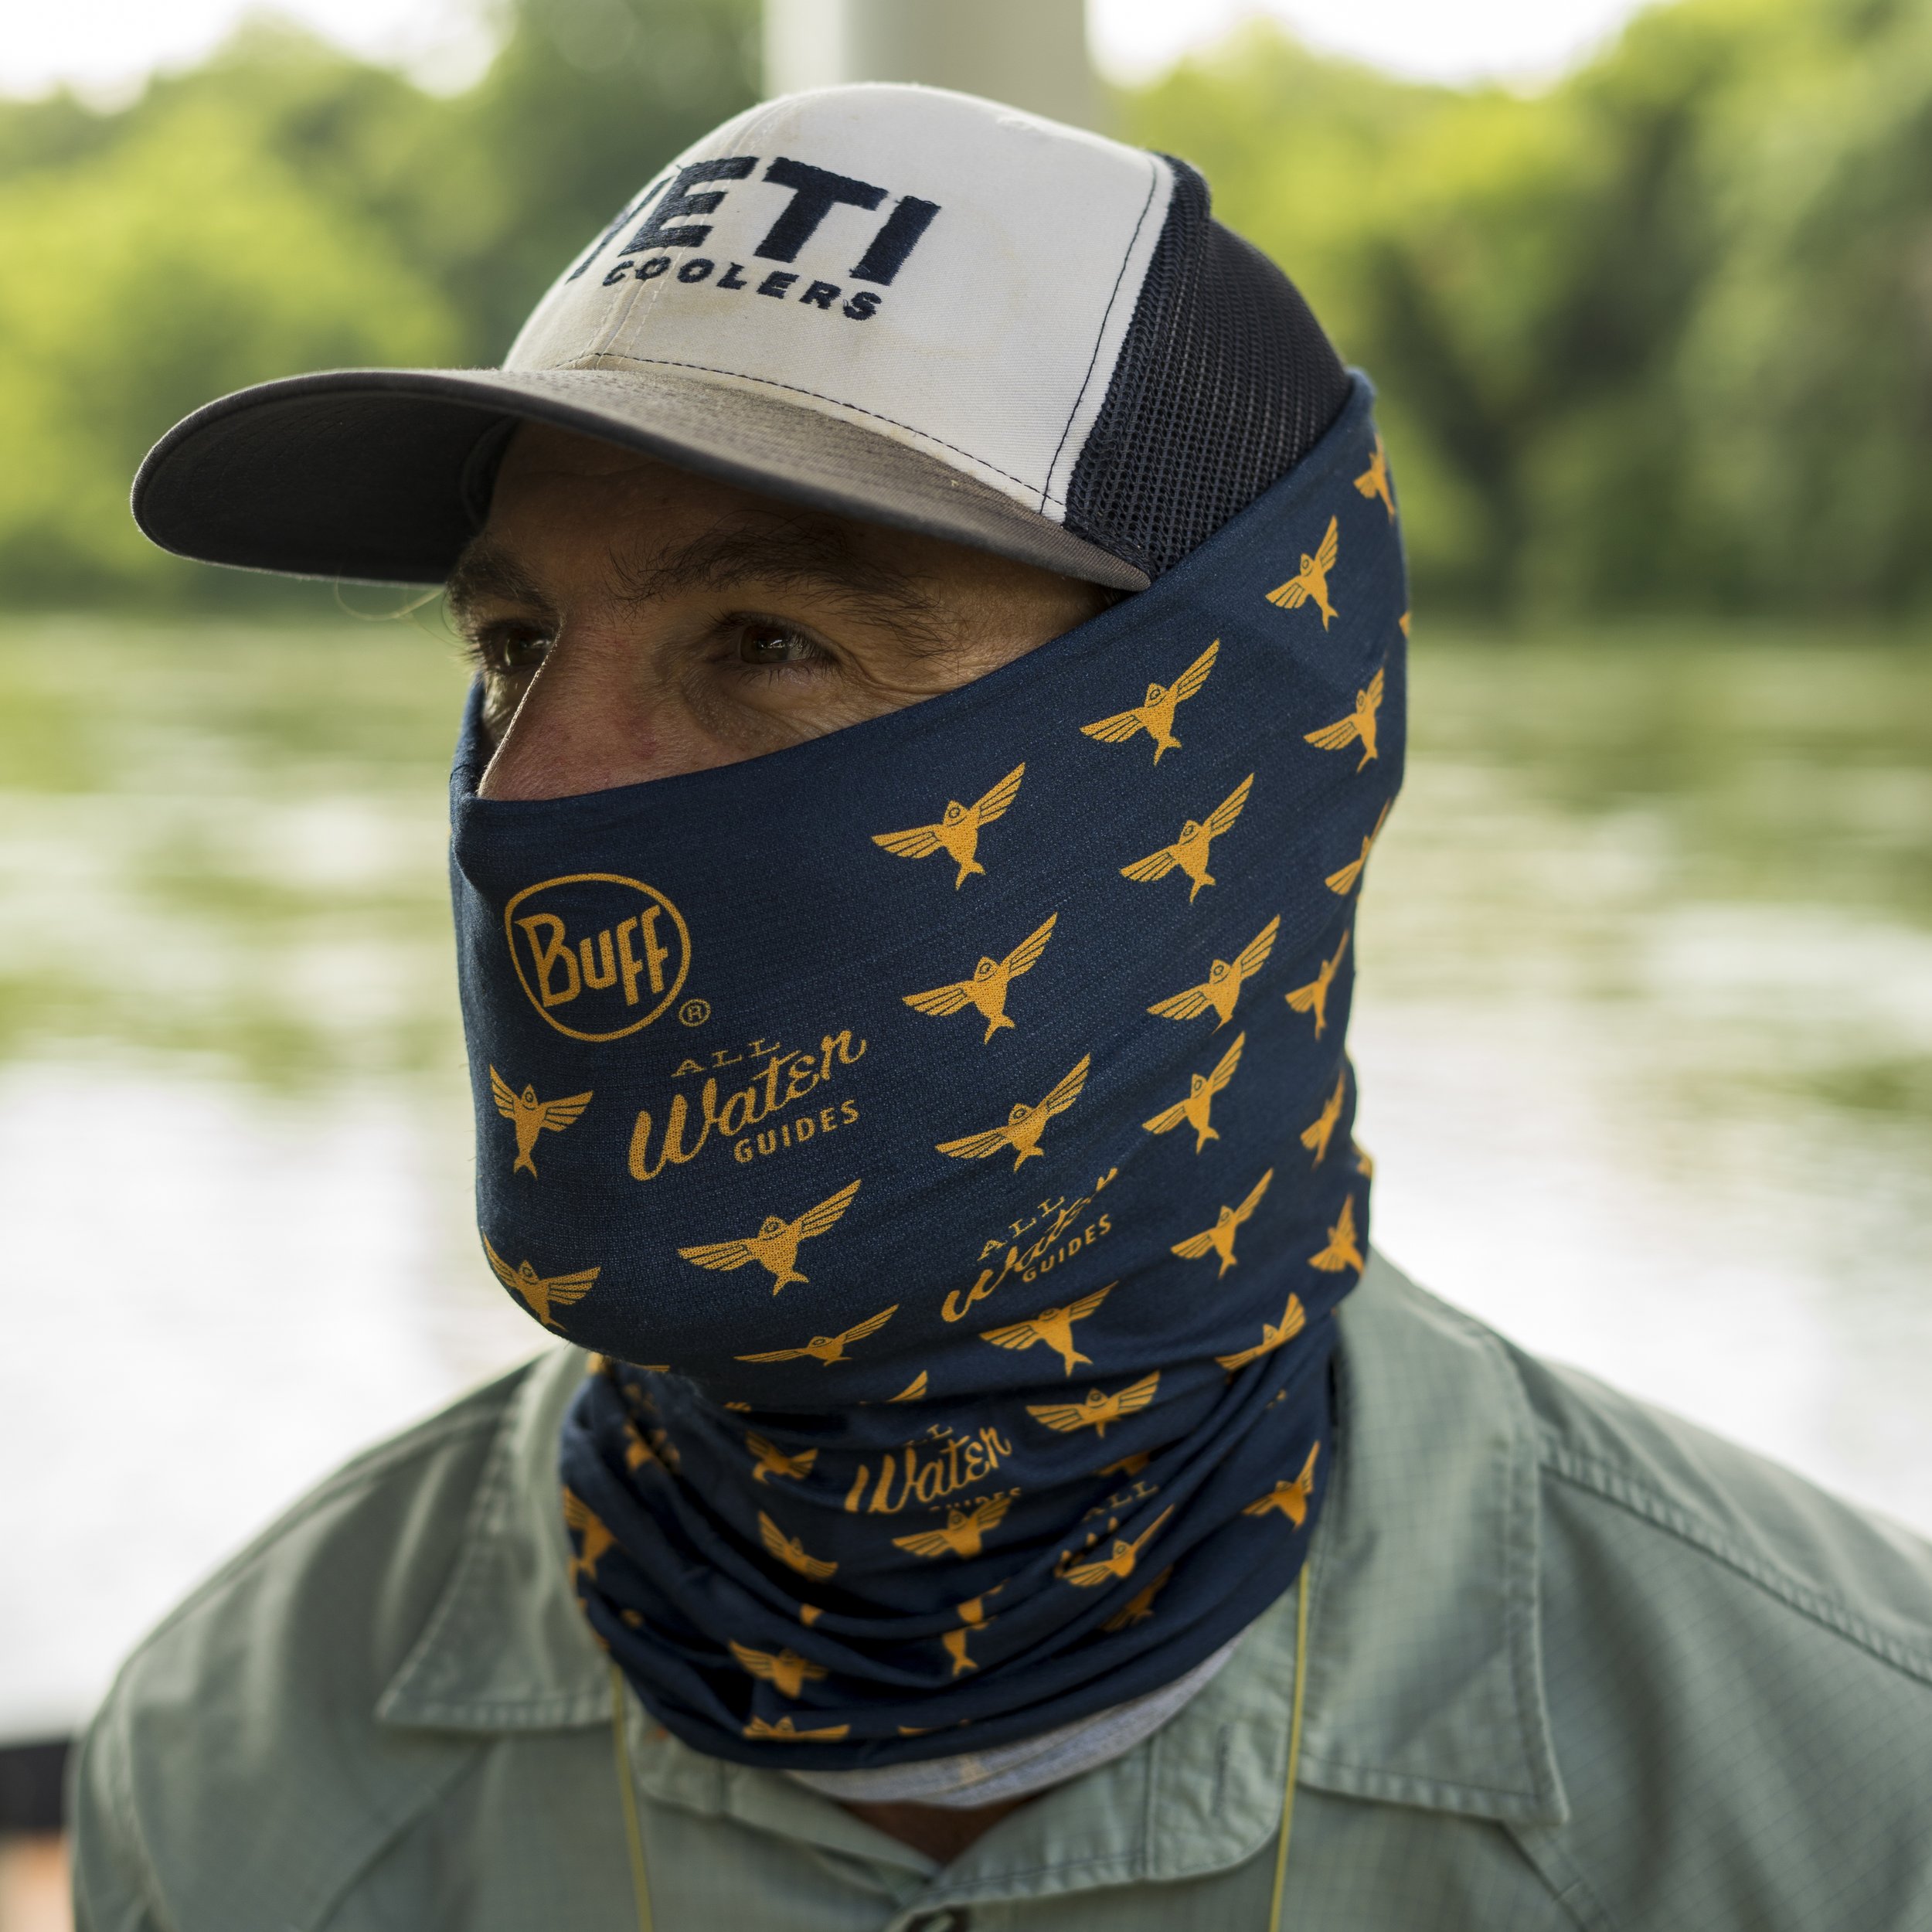 ALL WATER GUIDES CUSTOM NECK GAITER BY BUFF — All Water Guides